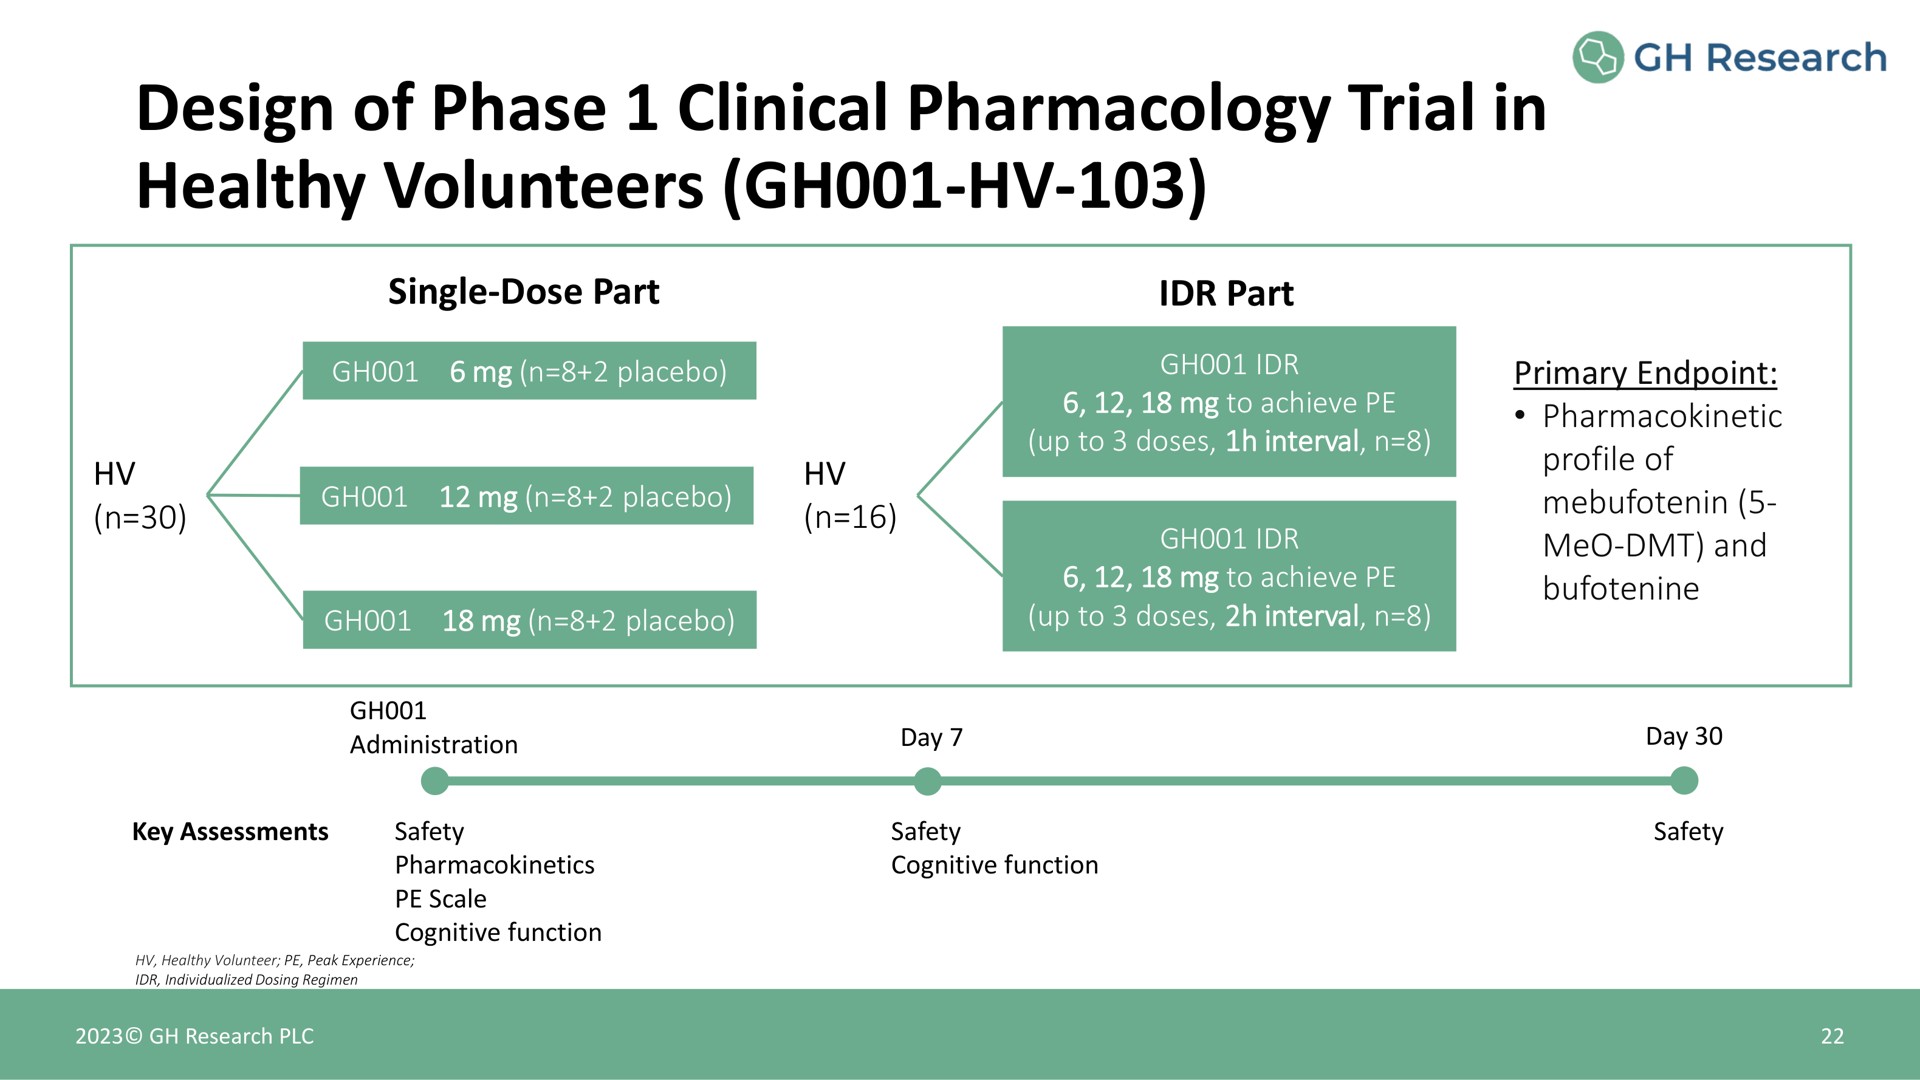 design of phase clinical pharmacology trial in healthy volunteers | GH Research